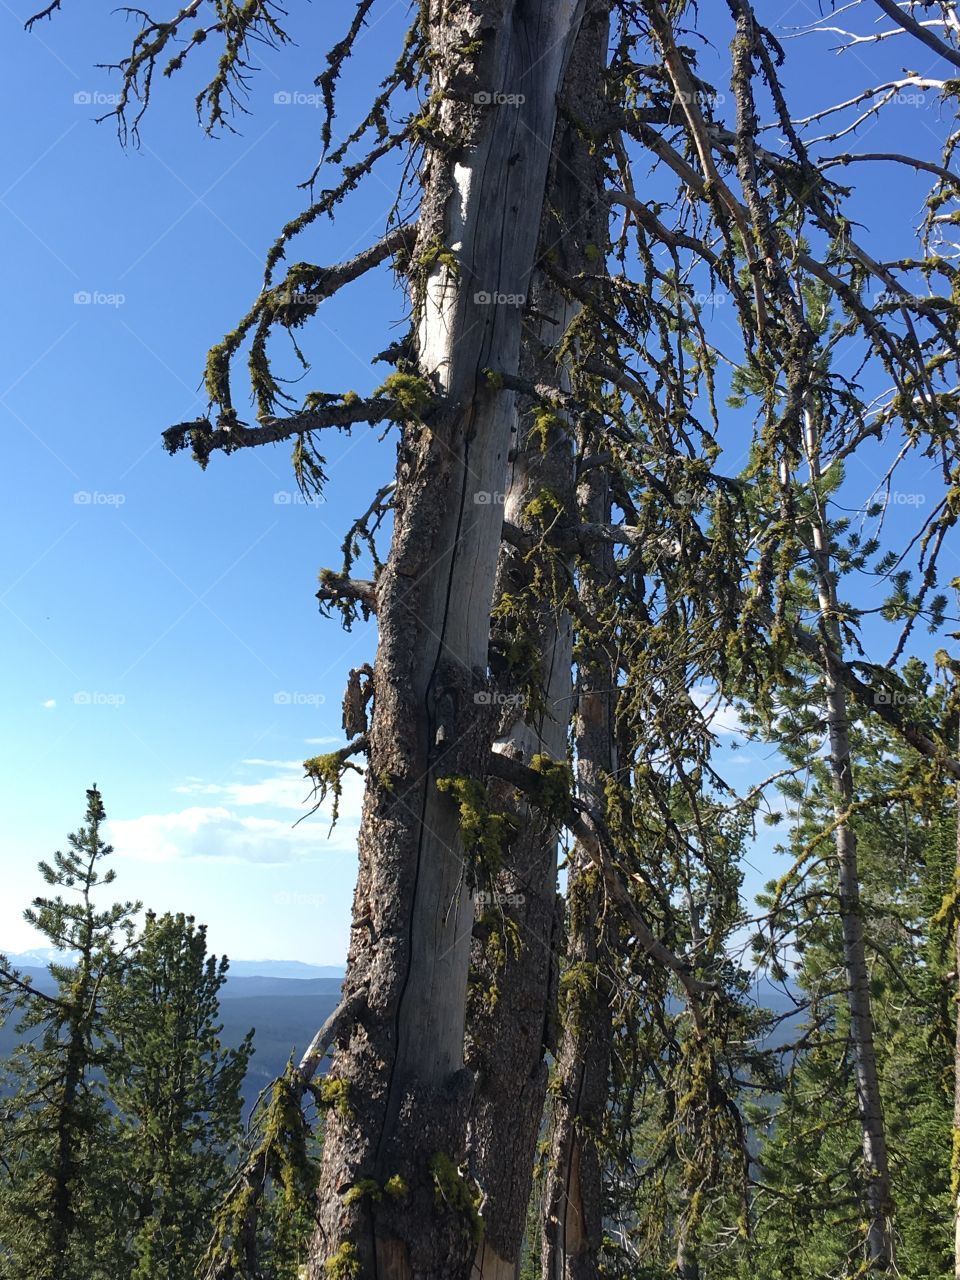 Lodgepole pines on Mt. Washburn in Yellowstone National Park